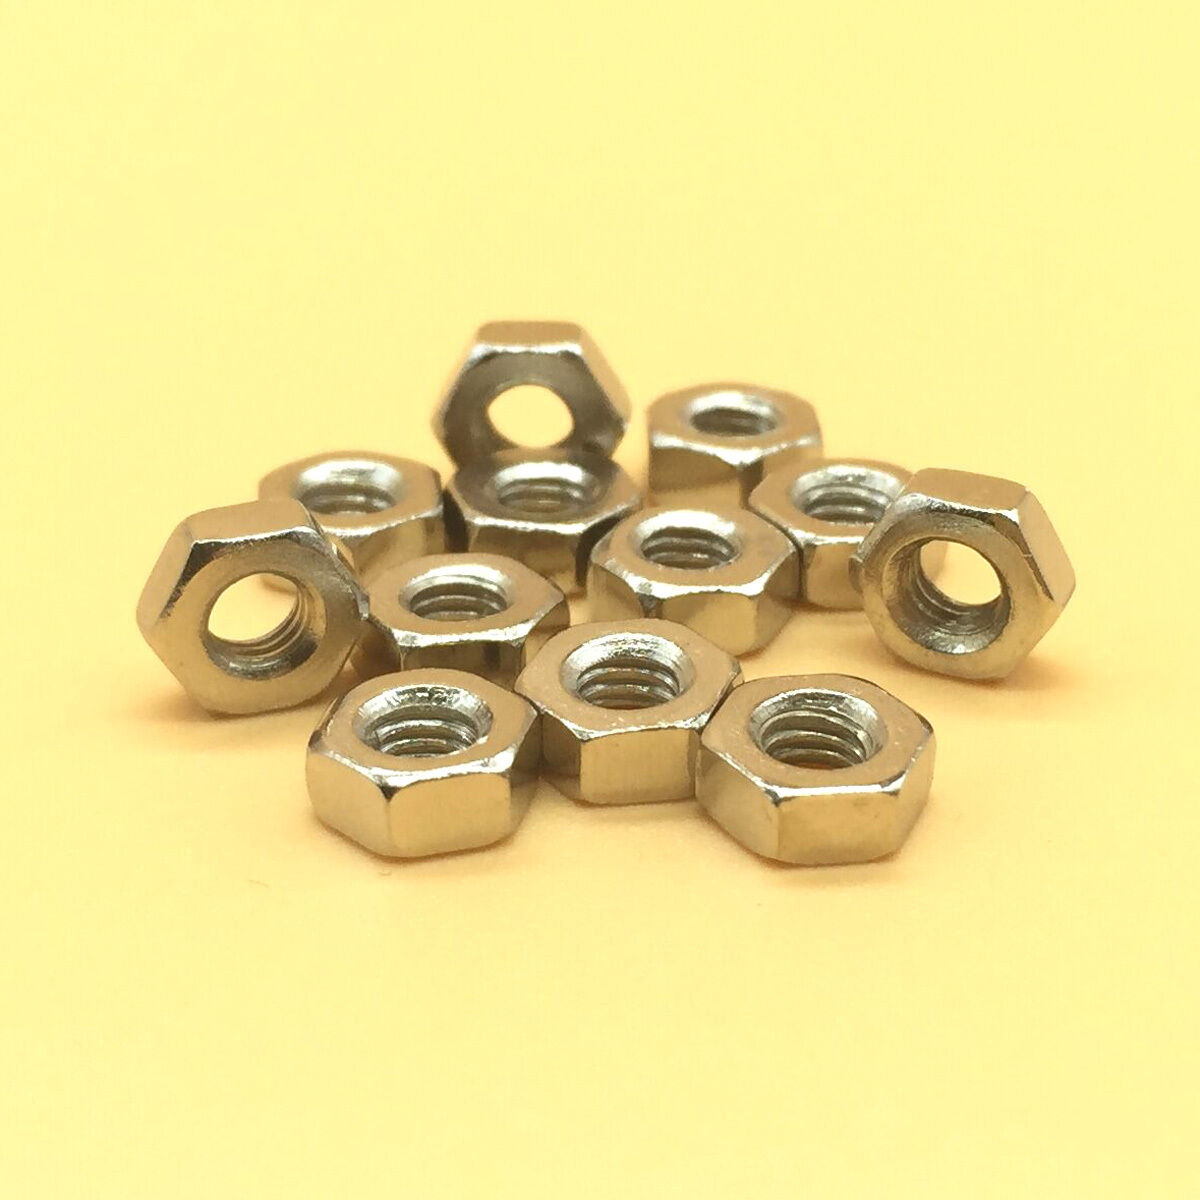 50pcs M4 x 0.5 Stainless Steel Hex Nut Right Hand Thread [M_M_S]